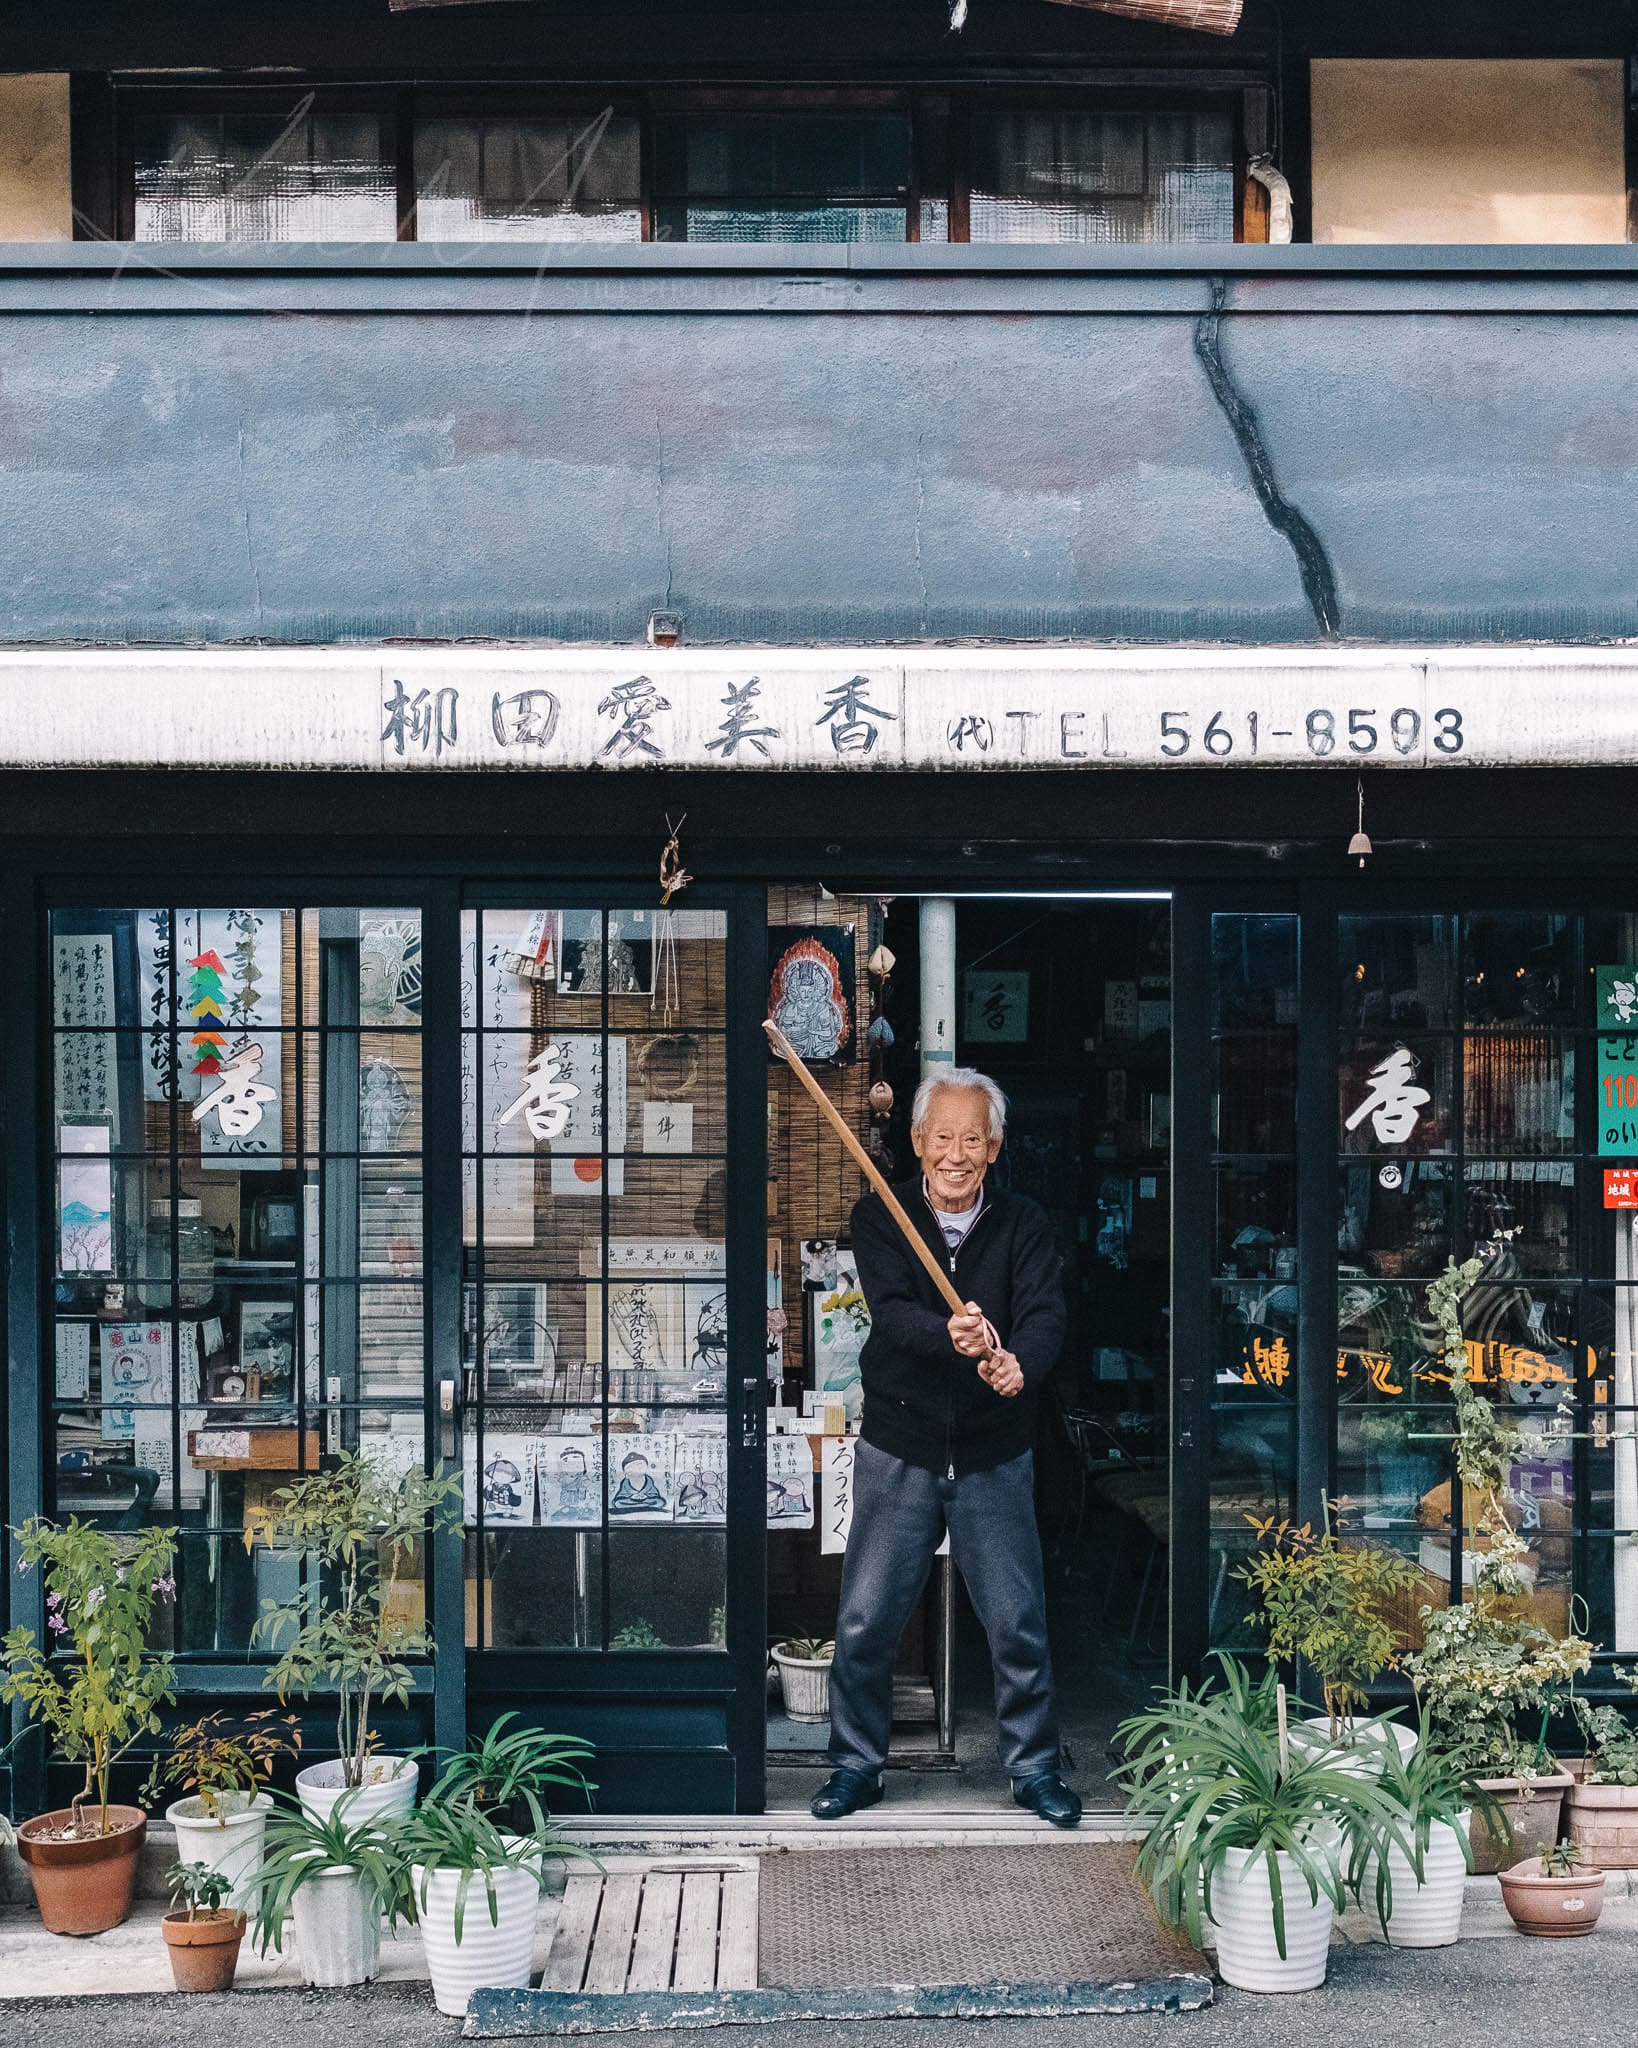 Kyoto antique shop owner tending store, surrounded by traditional architecture and green potted plants.